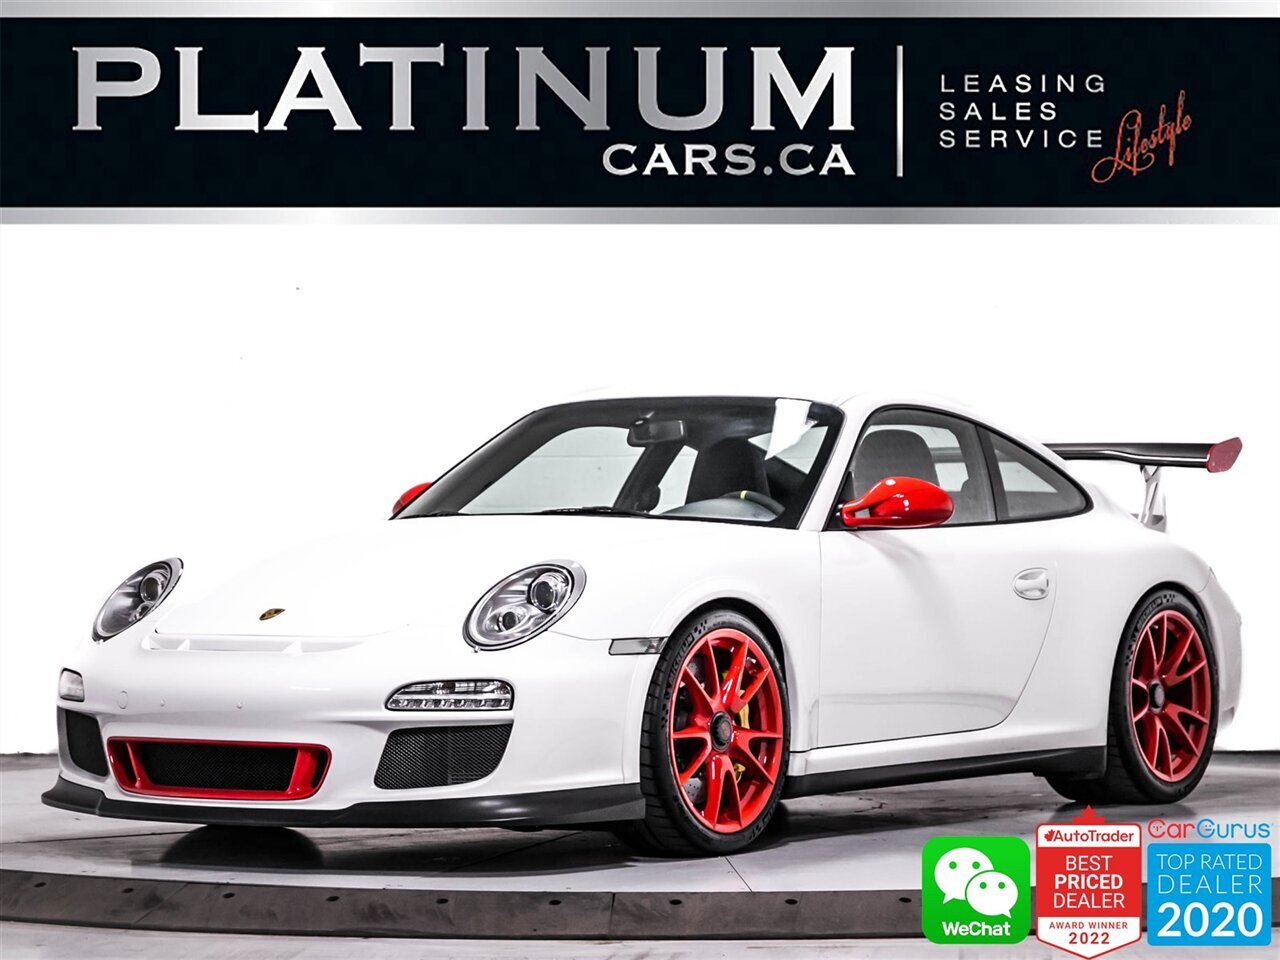 2010 Porsche 911 GT3 RS, 3.8L, 1 OF 612 FOR NORTH AMERICA, MANUAL